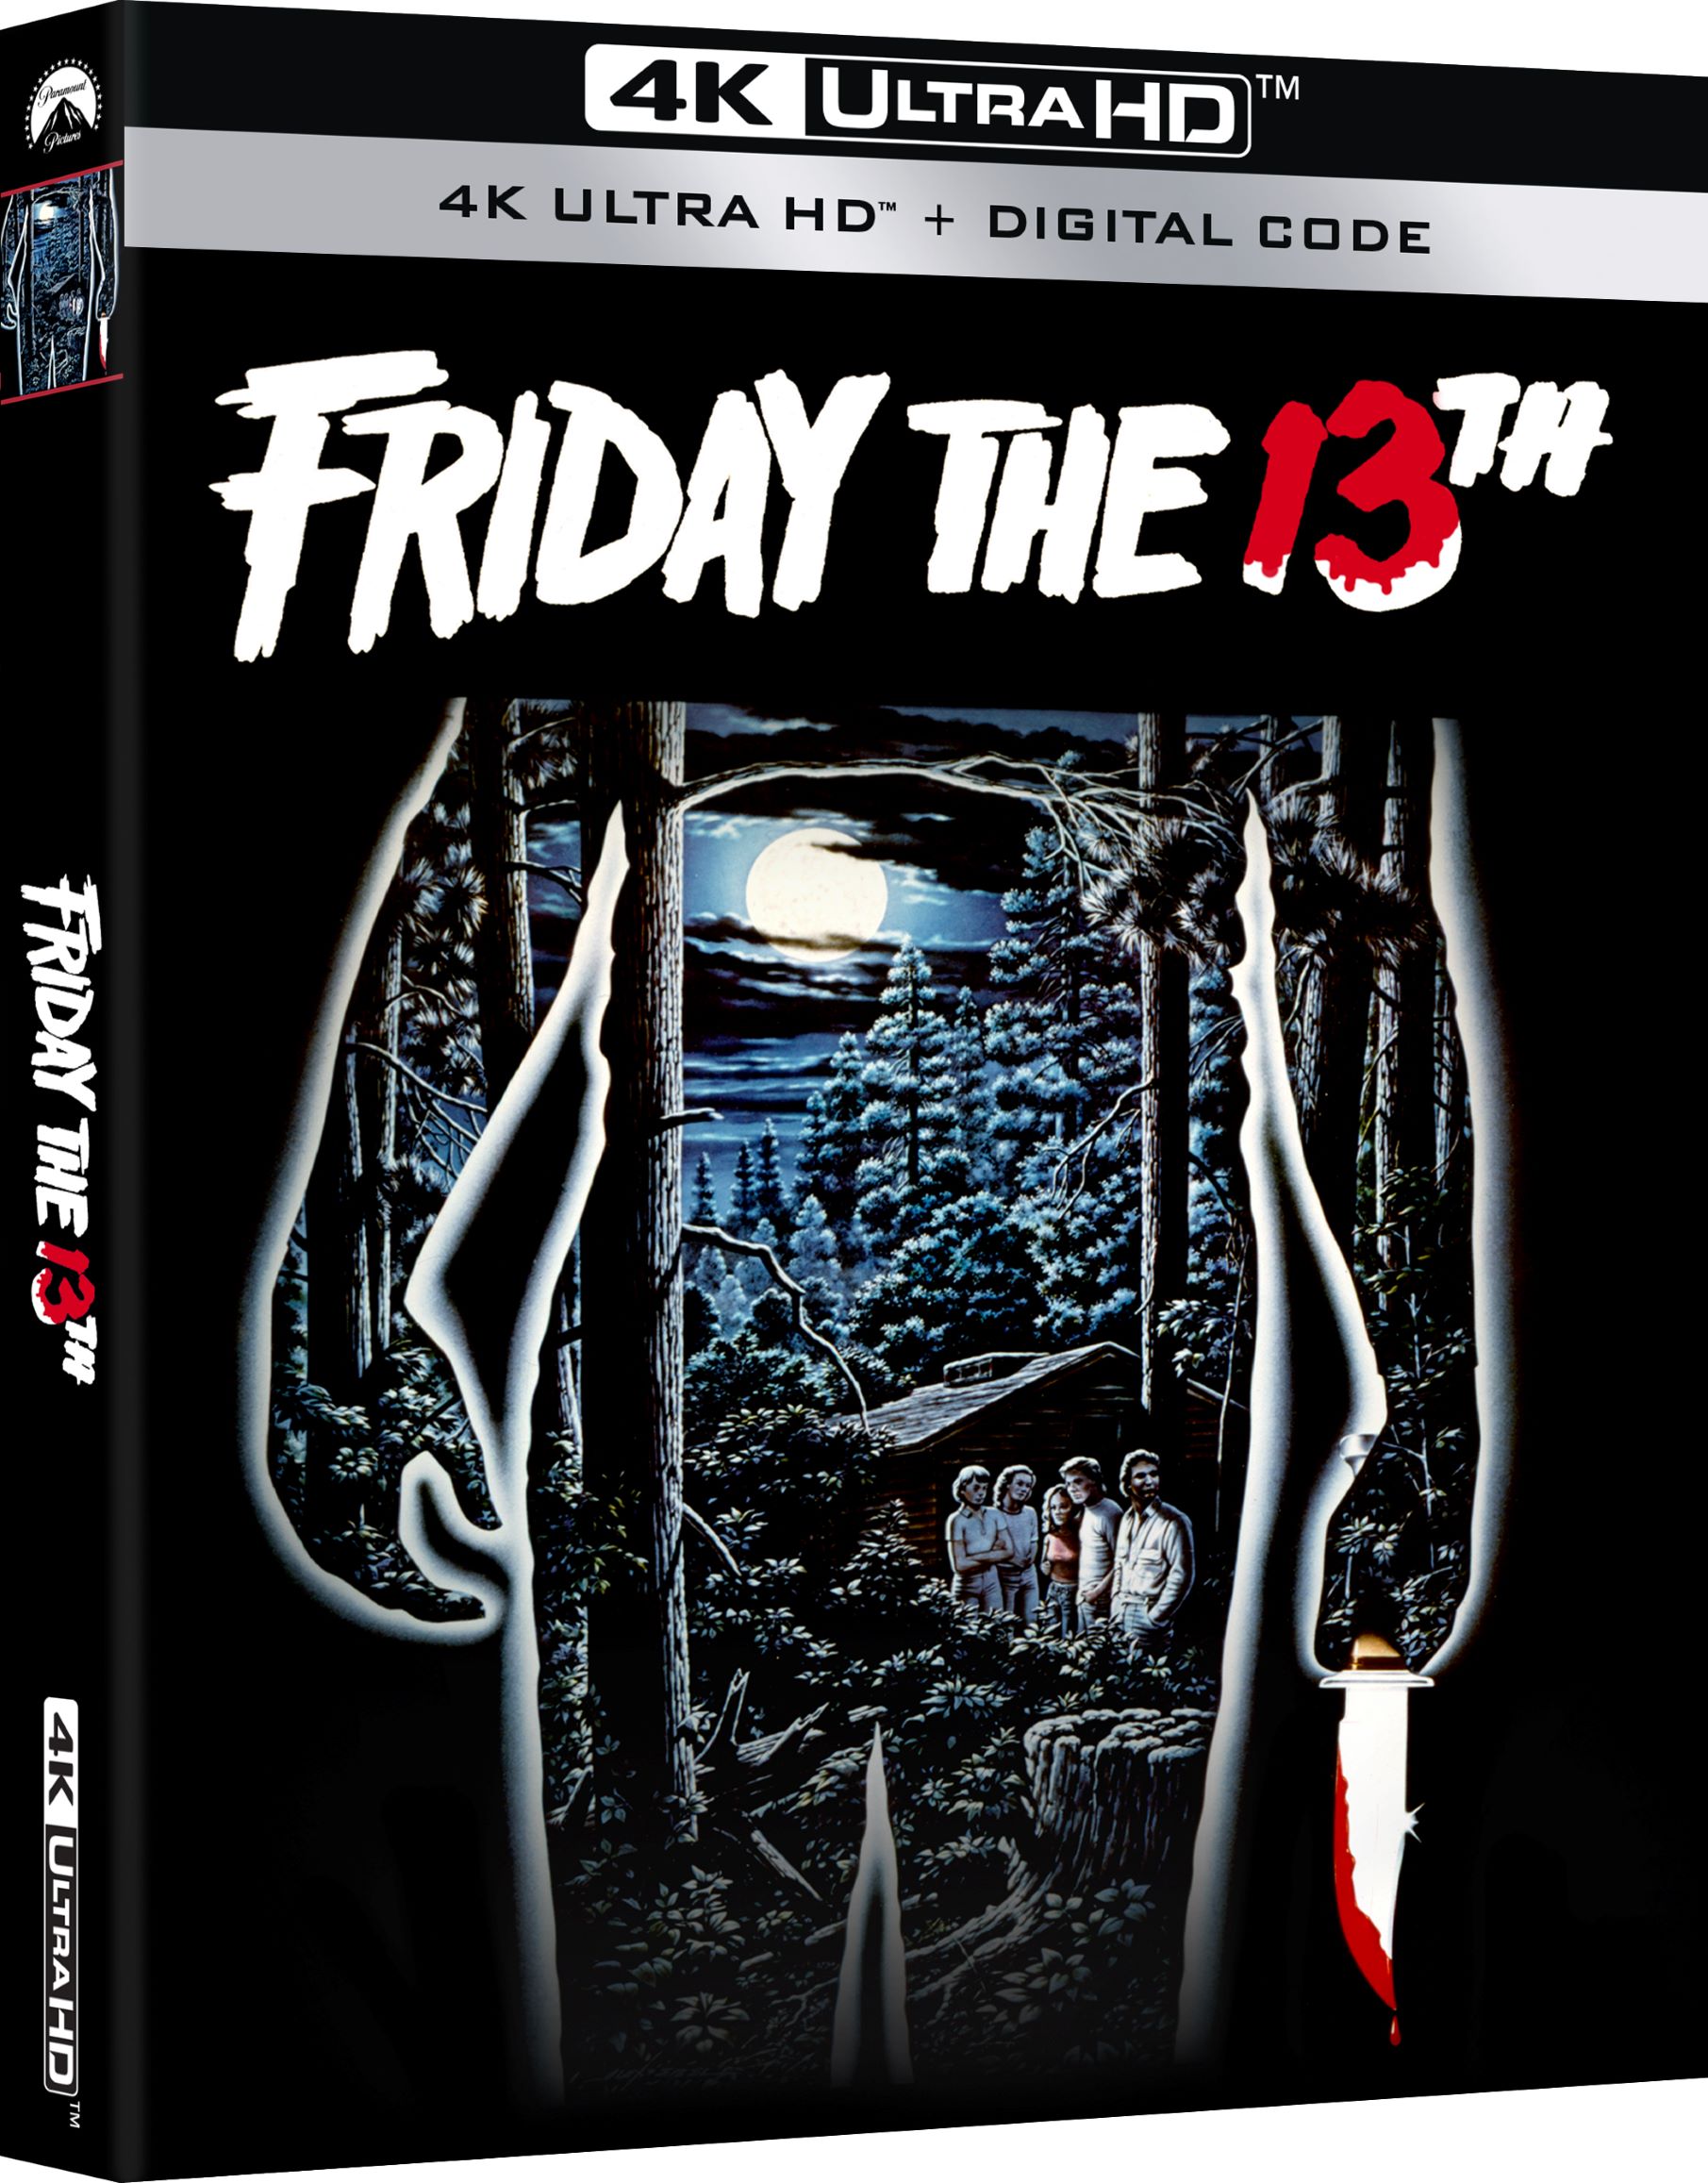 FRIDAY THE 13TH (1980)